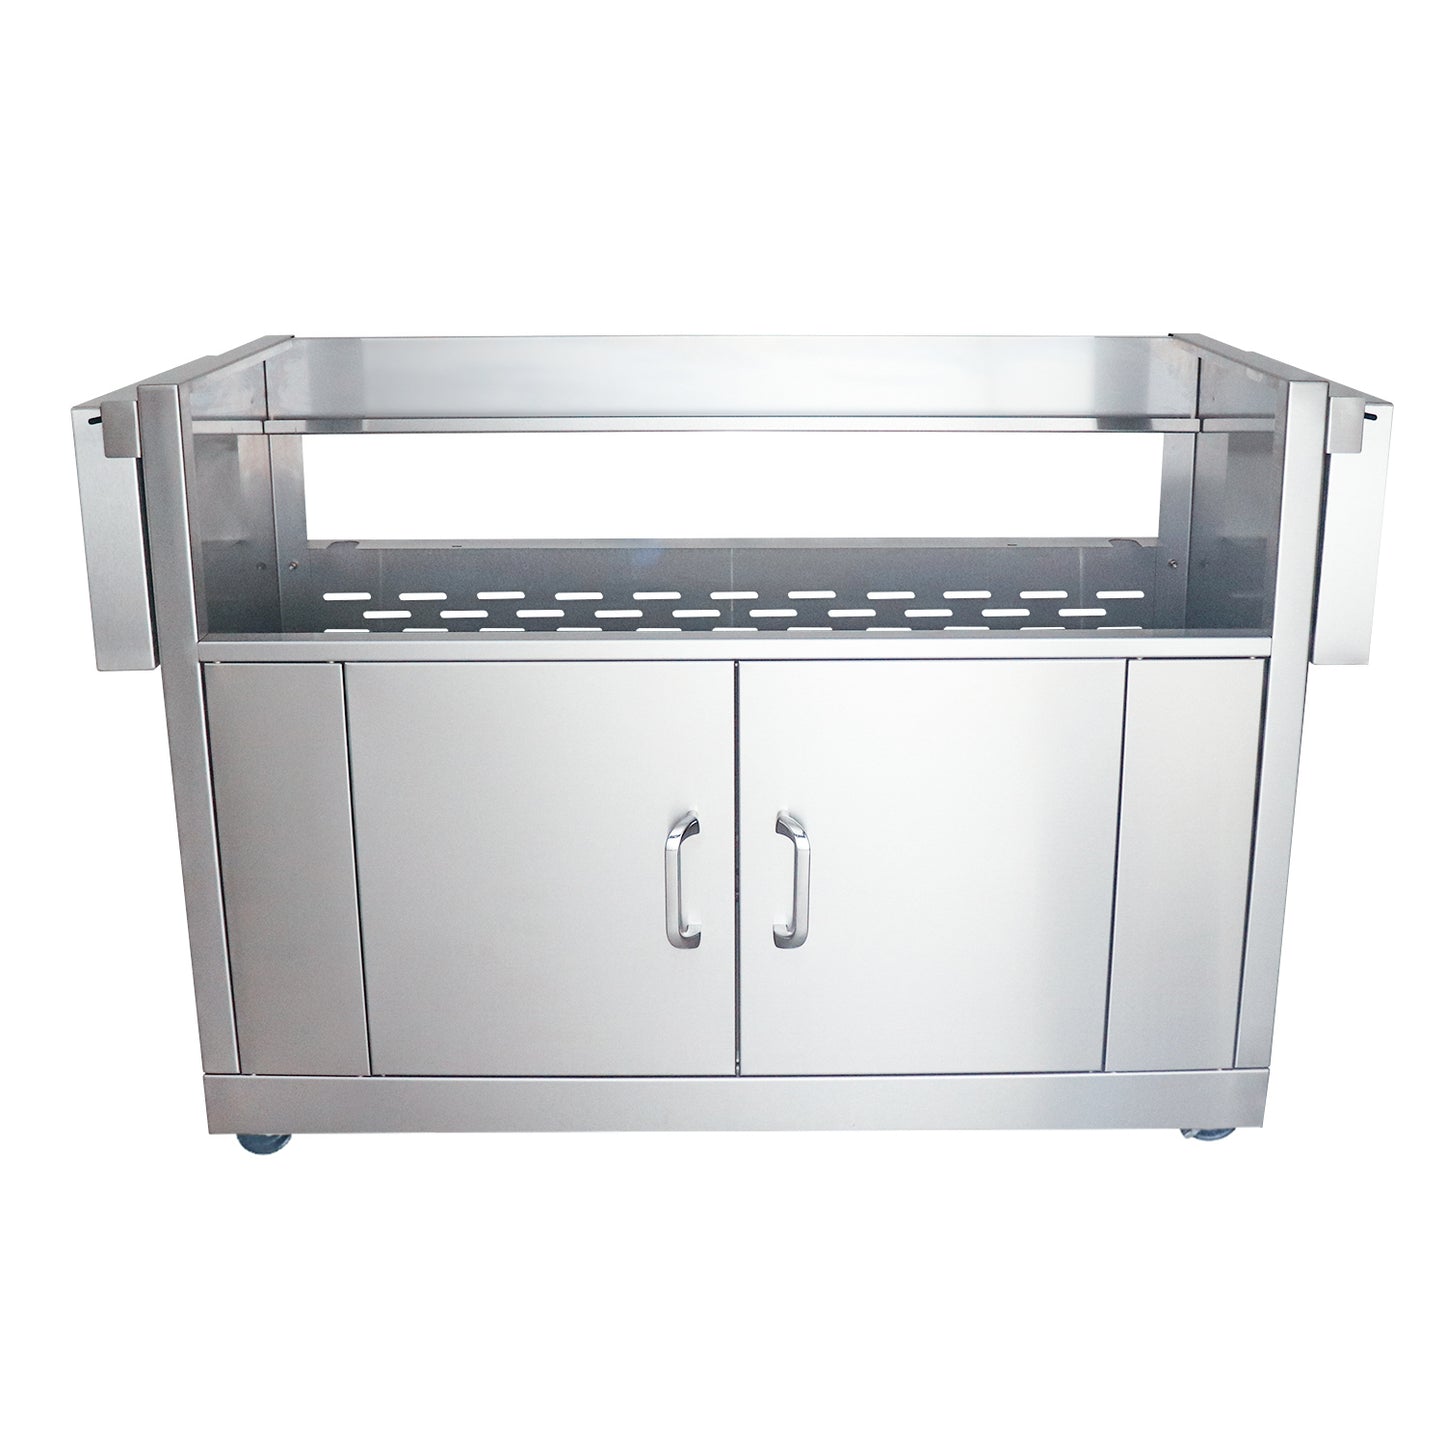 RCS Stainless Steel Grill Cart For 42-Inch RCS Grills - RONJC